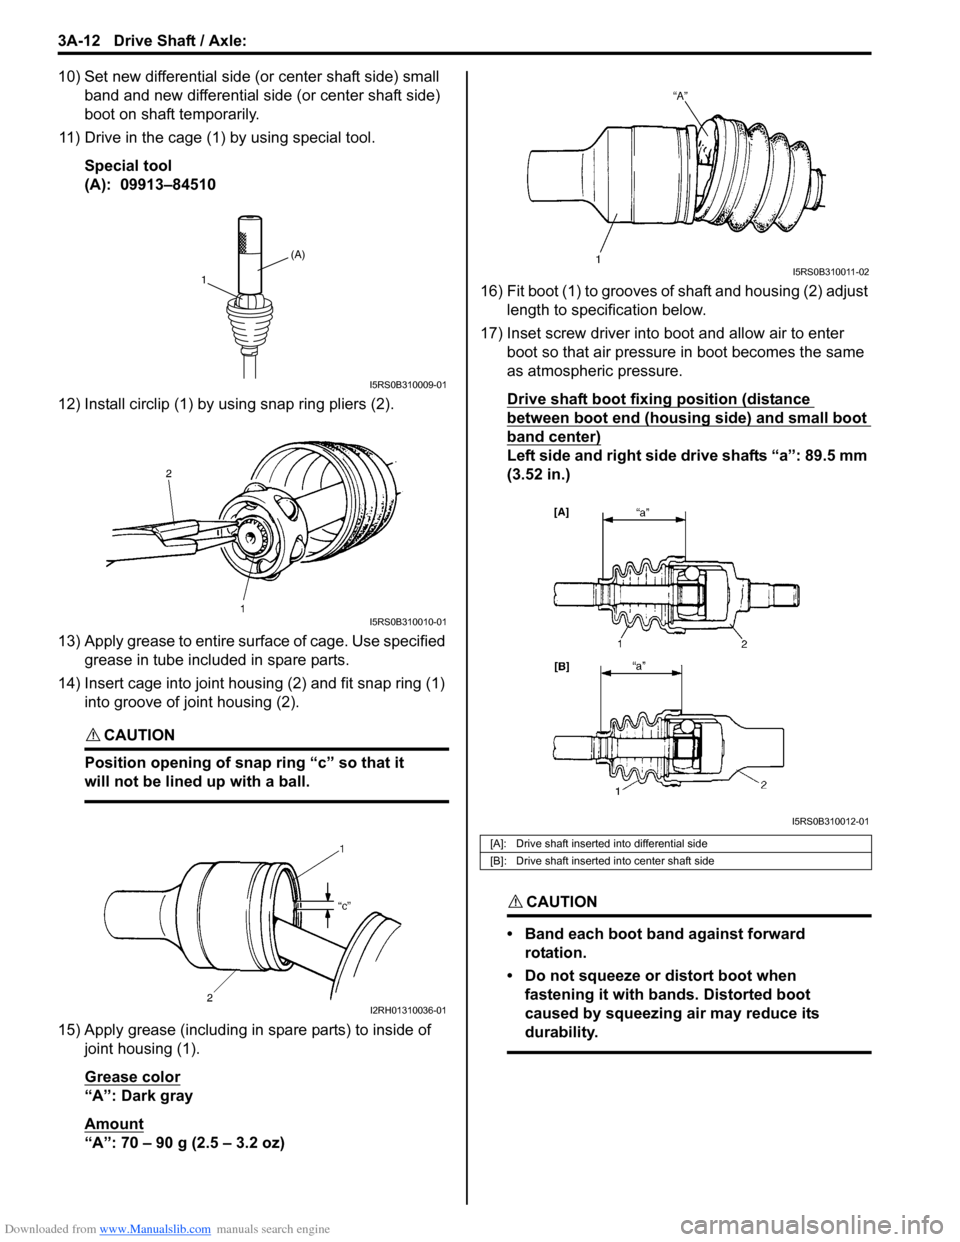 SUZUKI SWIFT 2005 2.G Service User Guide Downloaded from www.Manualslib.com manuals search engine 3A-12 Drive Shaft / Axle: 
10) Set new differential side (or center shaft side) small band and new differential side (or center shaft side) 
bo